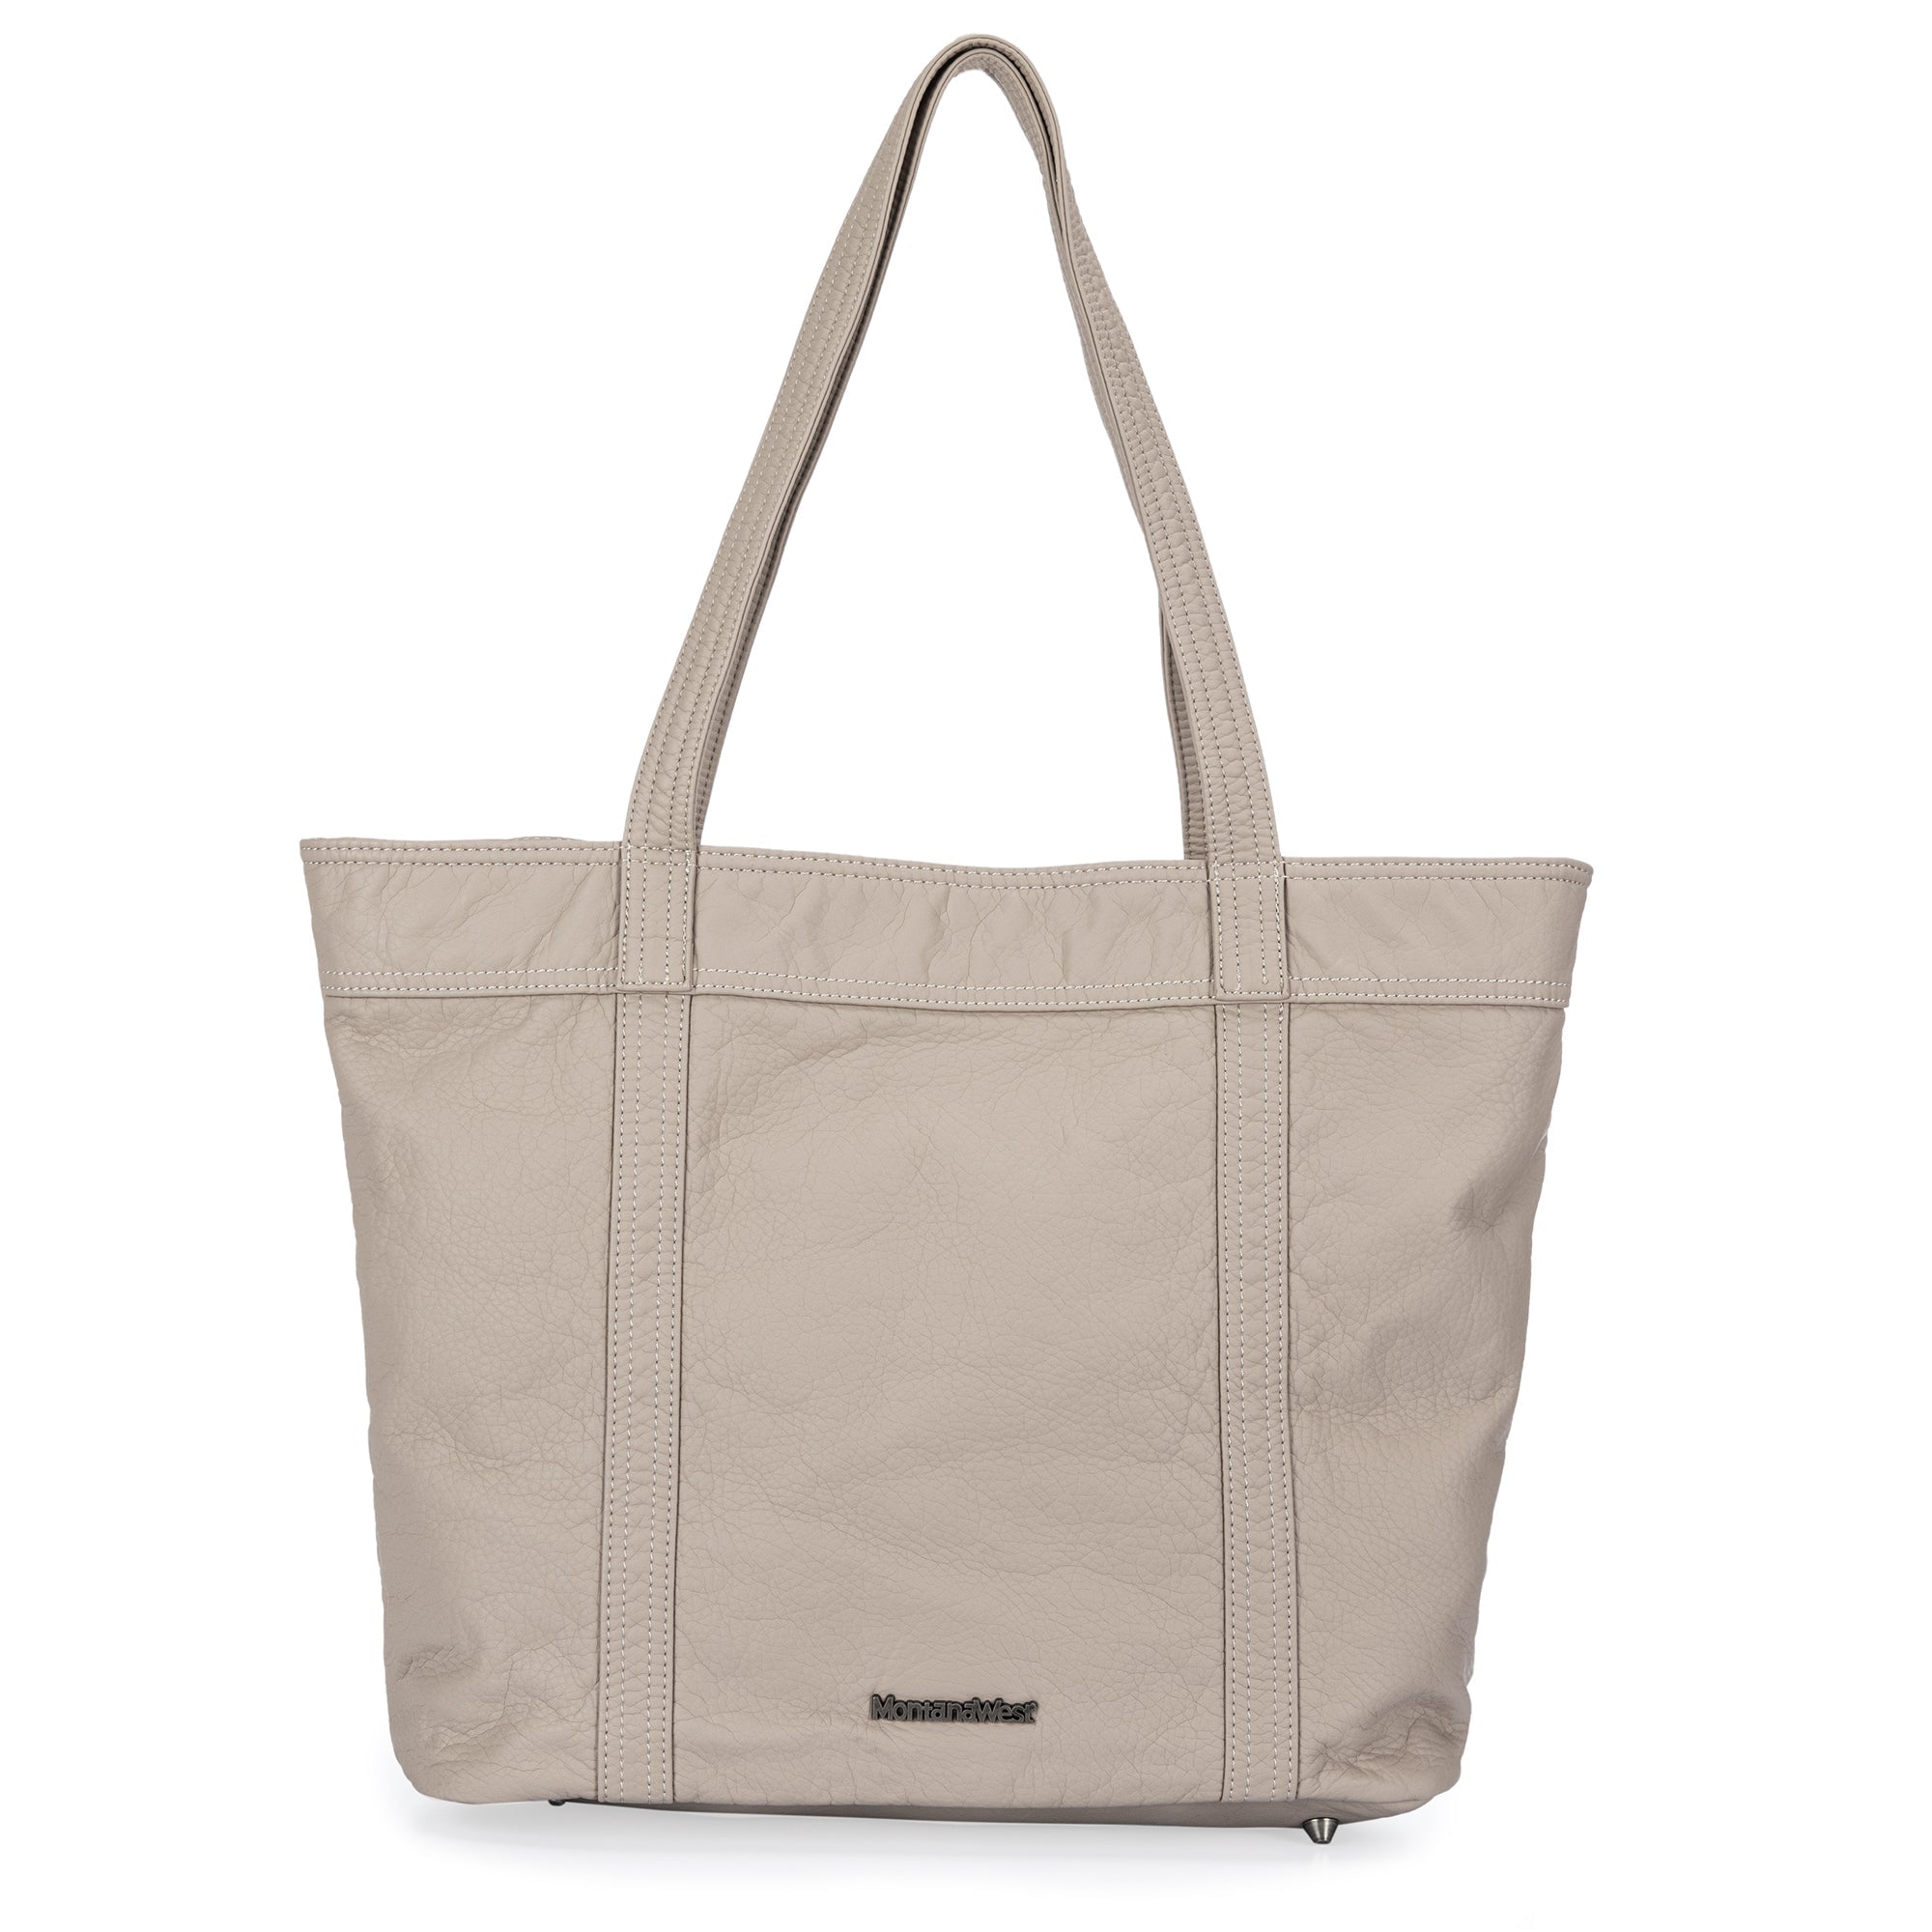 Montana West Stone Wash Tote Bag - Cowgirl Wear